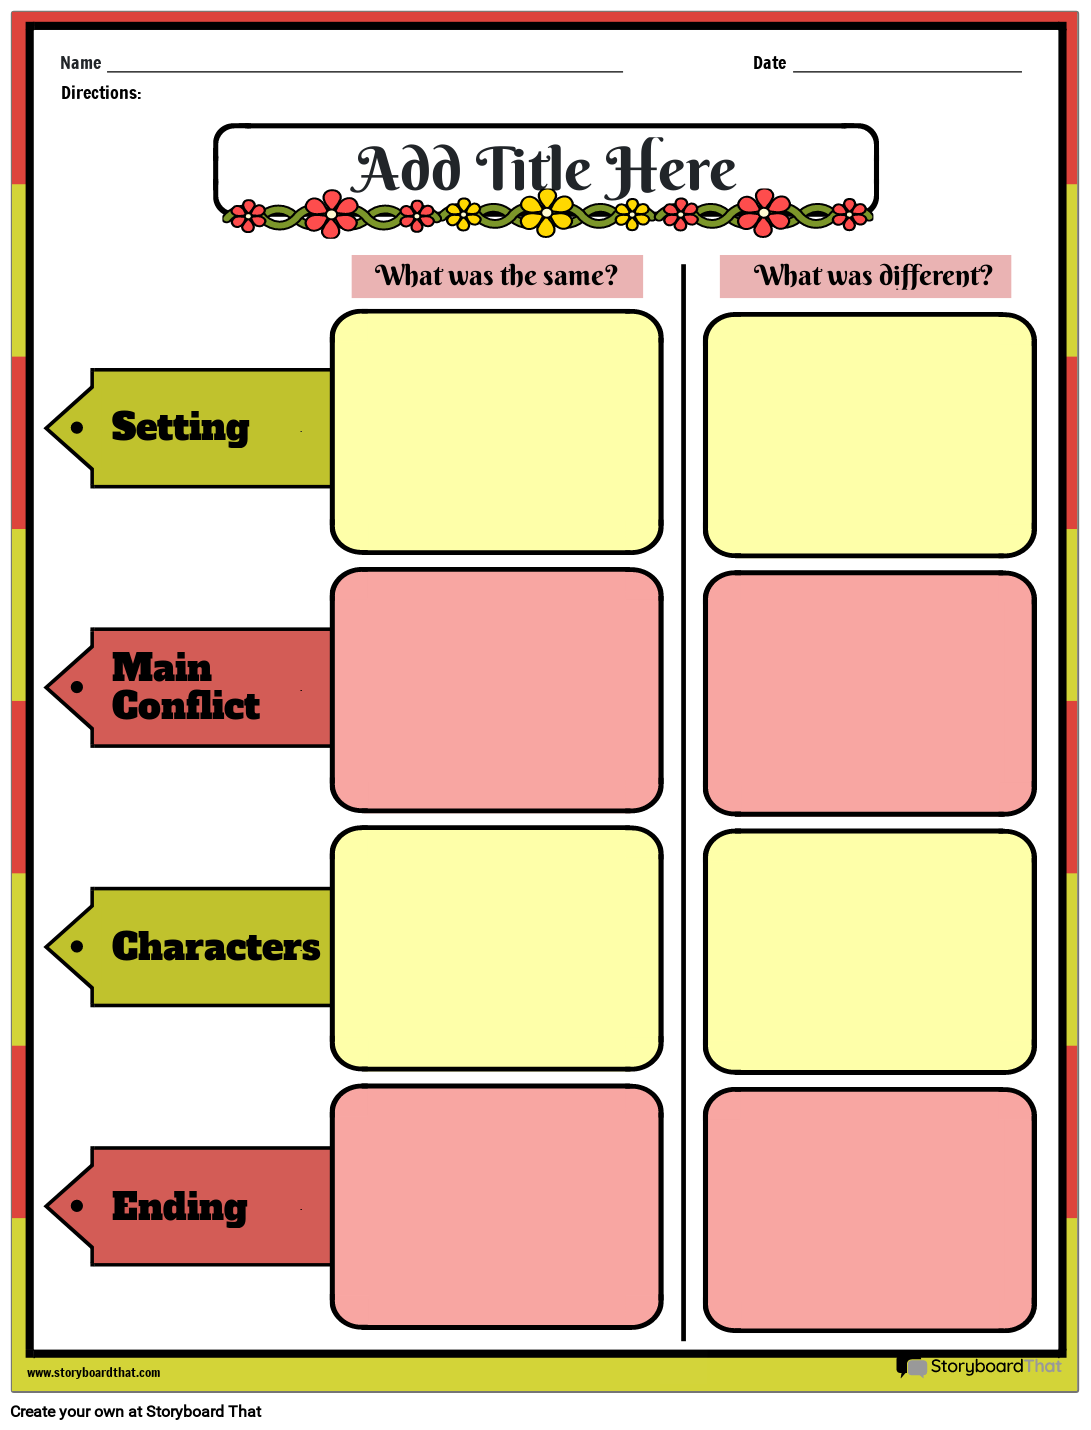 Short Story Showdown: Compare and Contrast Worksheet